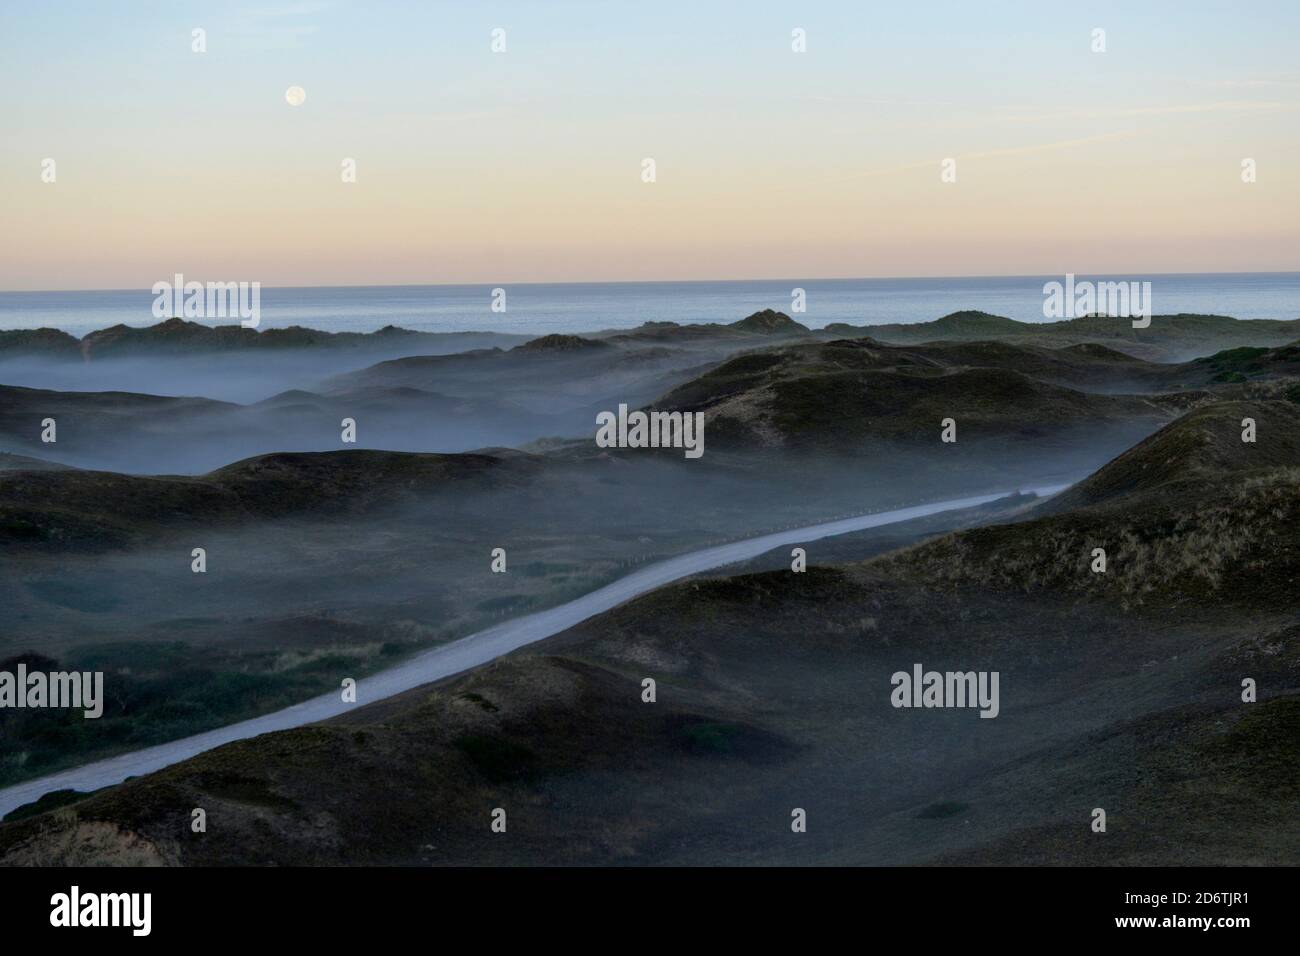 The Biville dunes along the coast of Normandy, on the Cotentin Peninsula. Overview of the stretch of sand of Biville at dusk, in the mist. The site is Stock Photo